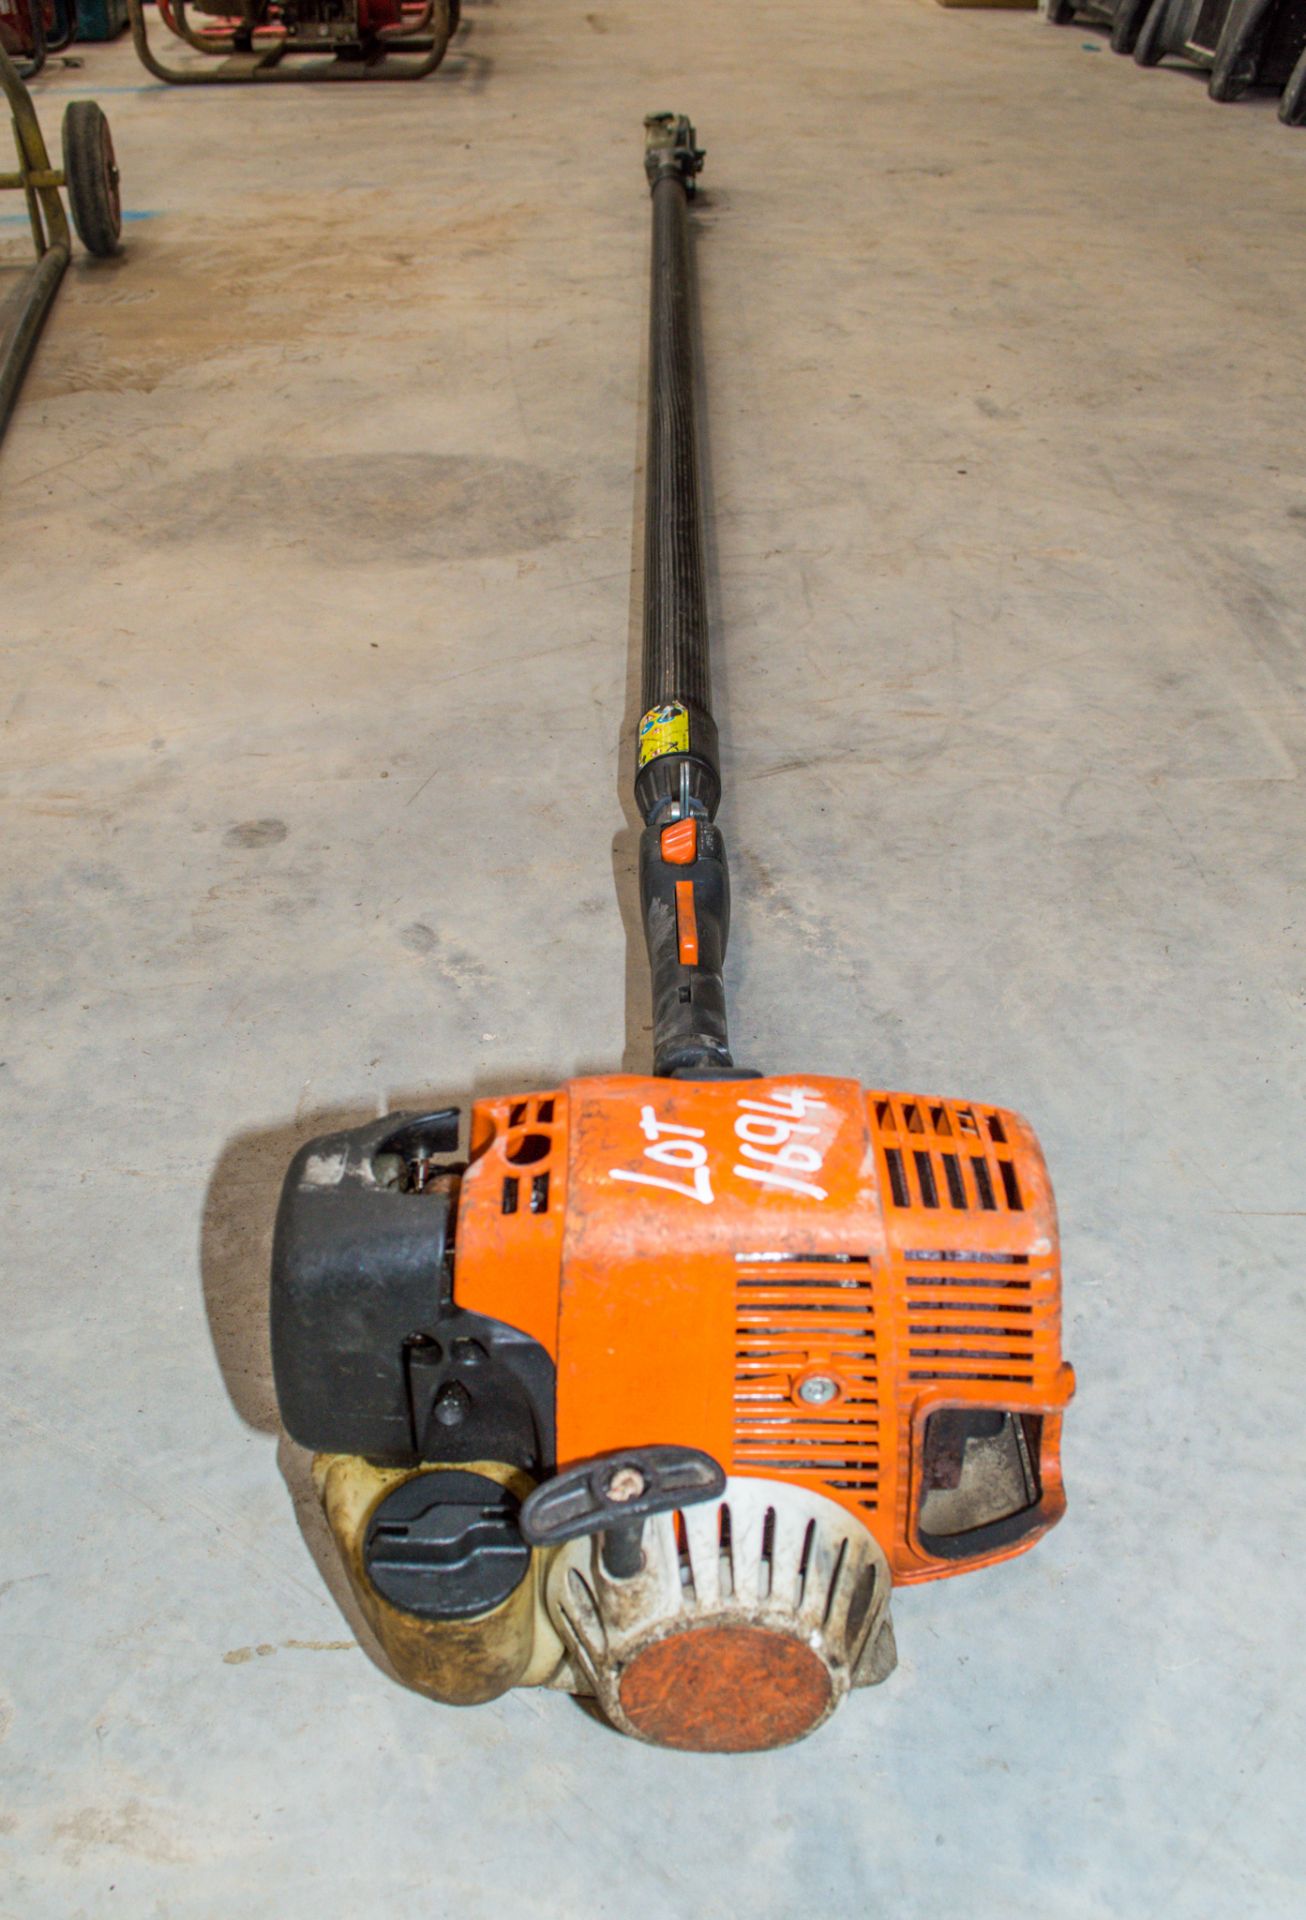 Stihl petrol driven long reach hedge trimmer ** Cutting head missing ** 16090056 - Image 2 of 2